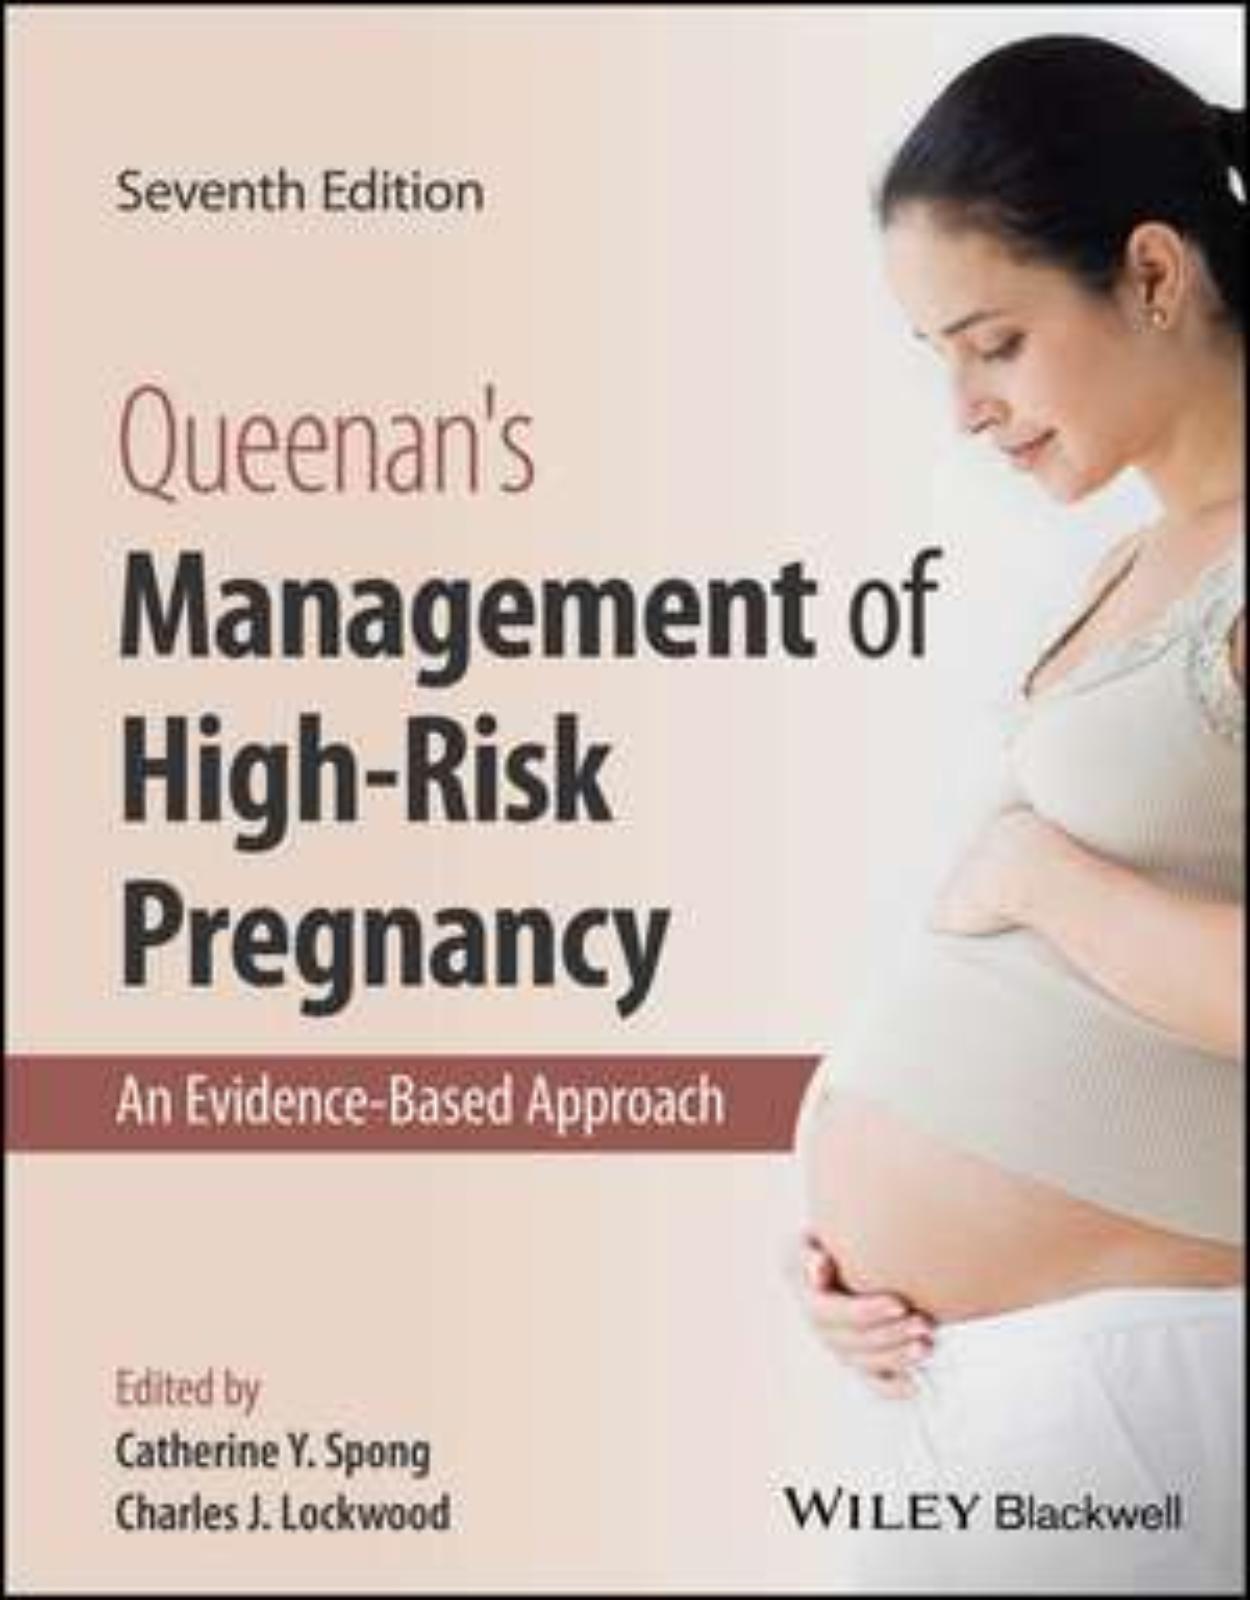 Queenan′s Management of High–Risk Pregnancy – An Evidence–Based Approach 7e